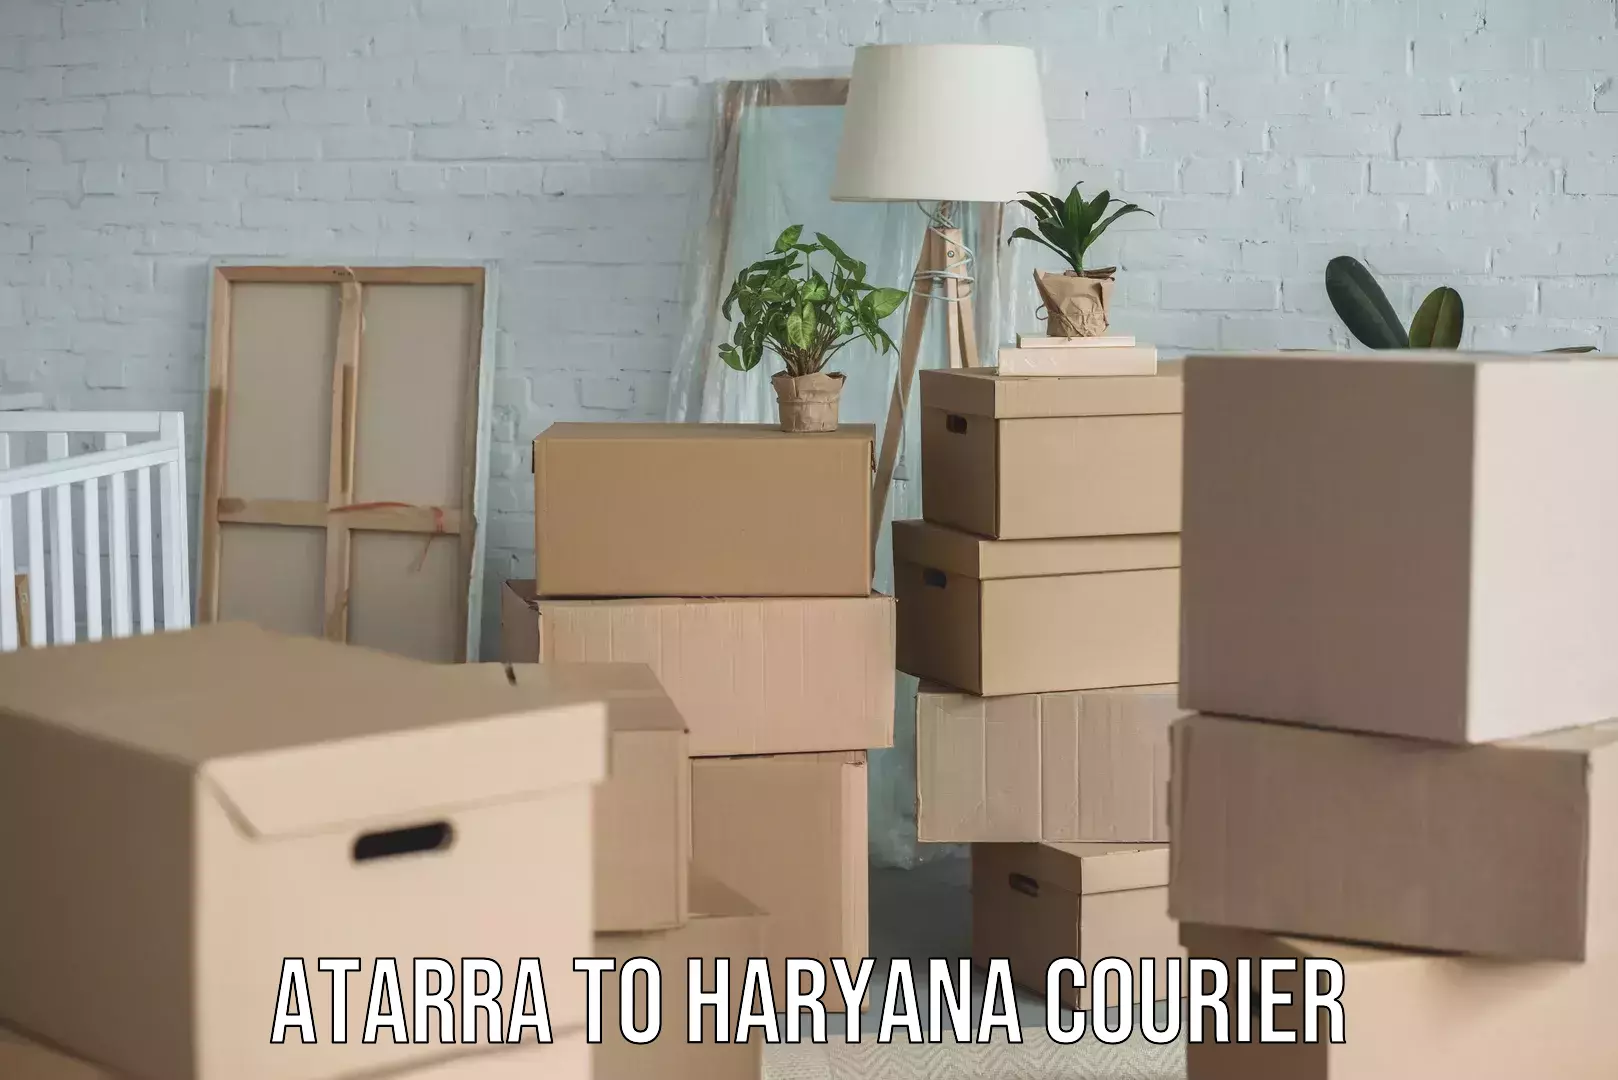 Overnight delivery services Atarra to Haryana